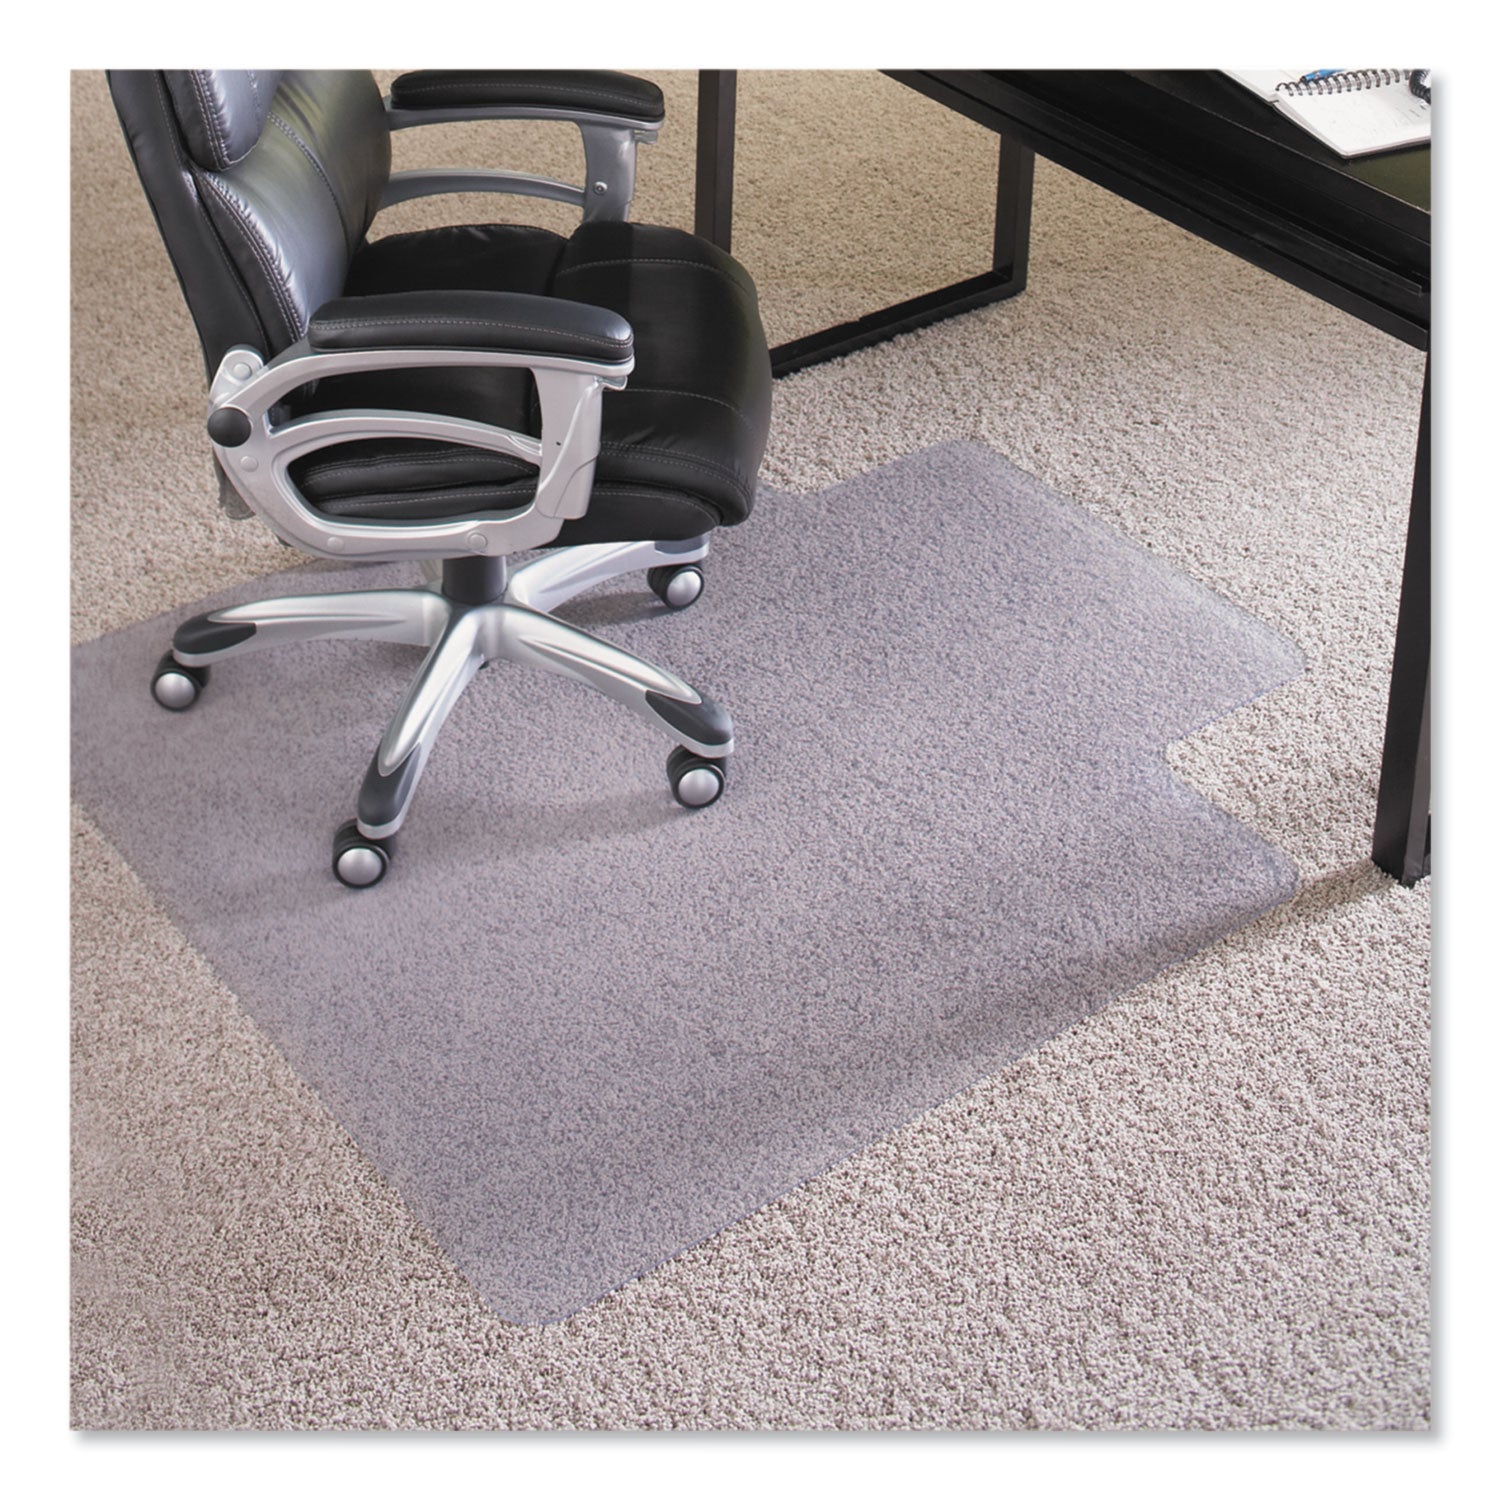 EverLife Intensive Use Chair Mat for High Pile Carpet, Rectangular with Lip, 45 x 53, Clear - 